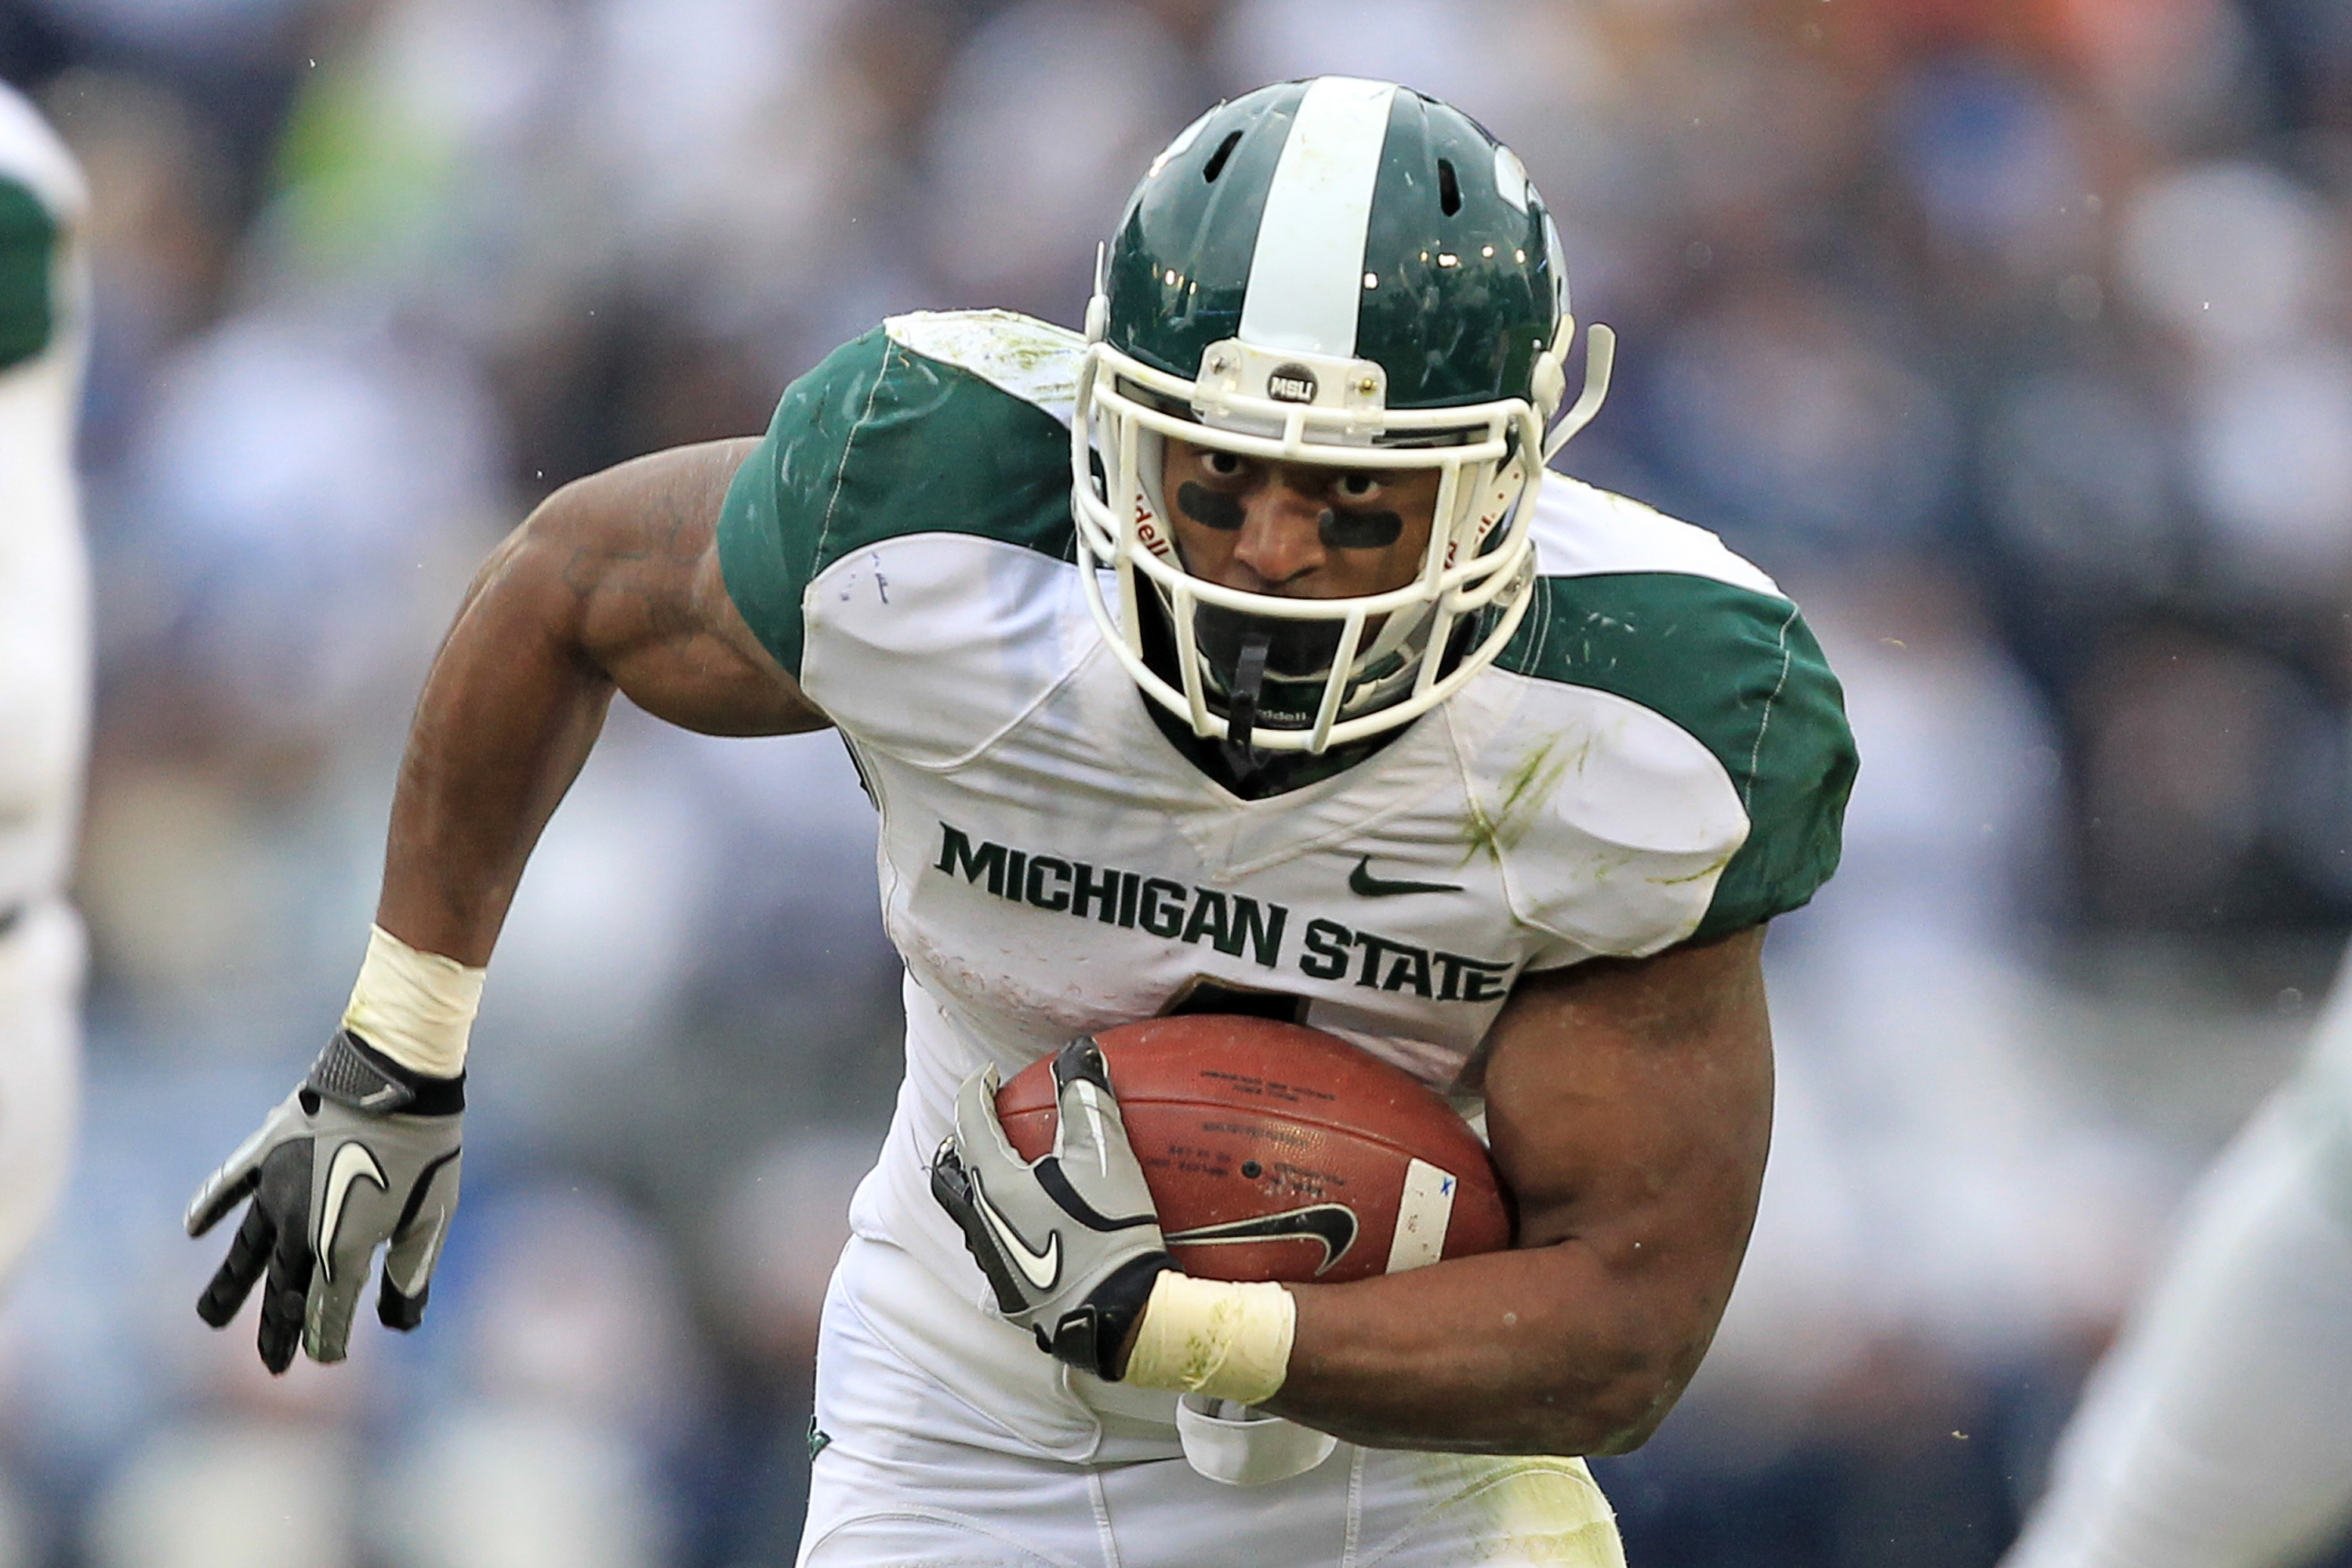 STATE COLLEGE, PA - NOVEMBER 27: Running back Edwin Baker #4 of the Michigan State Spartans carries the ball during a game against the Penn State Nittany Lions on November 27, 2010 at Beaver Stadium in State College, Pennsylvania. The Spartans won 28-22.(